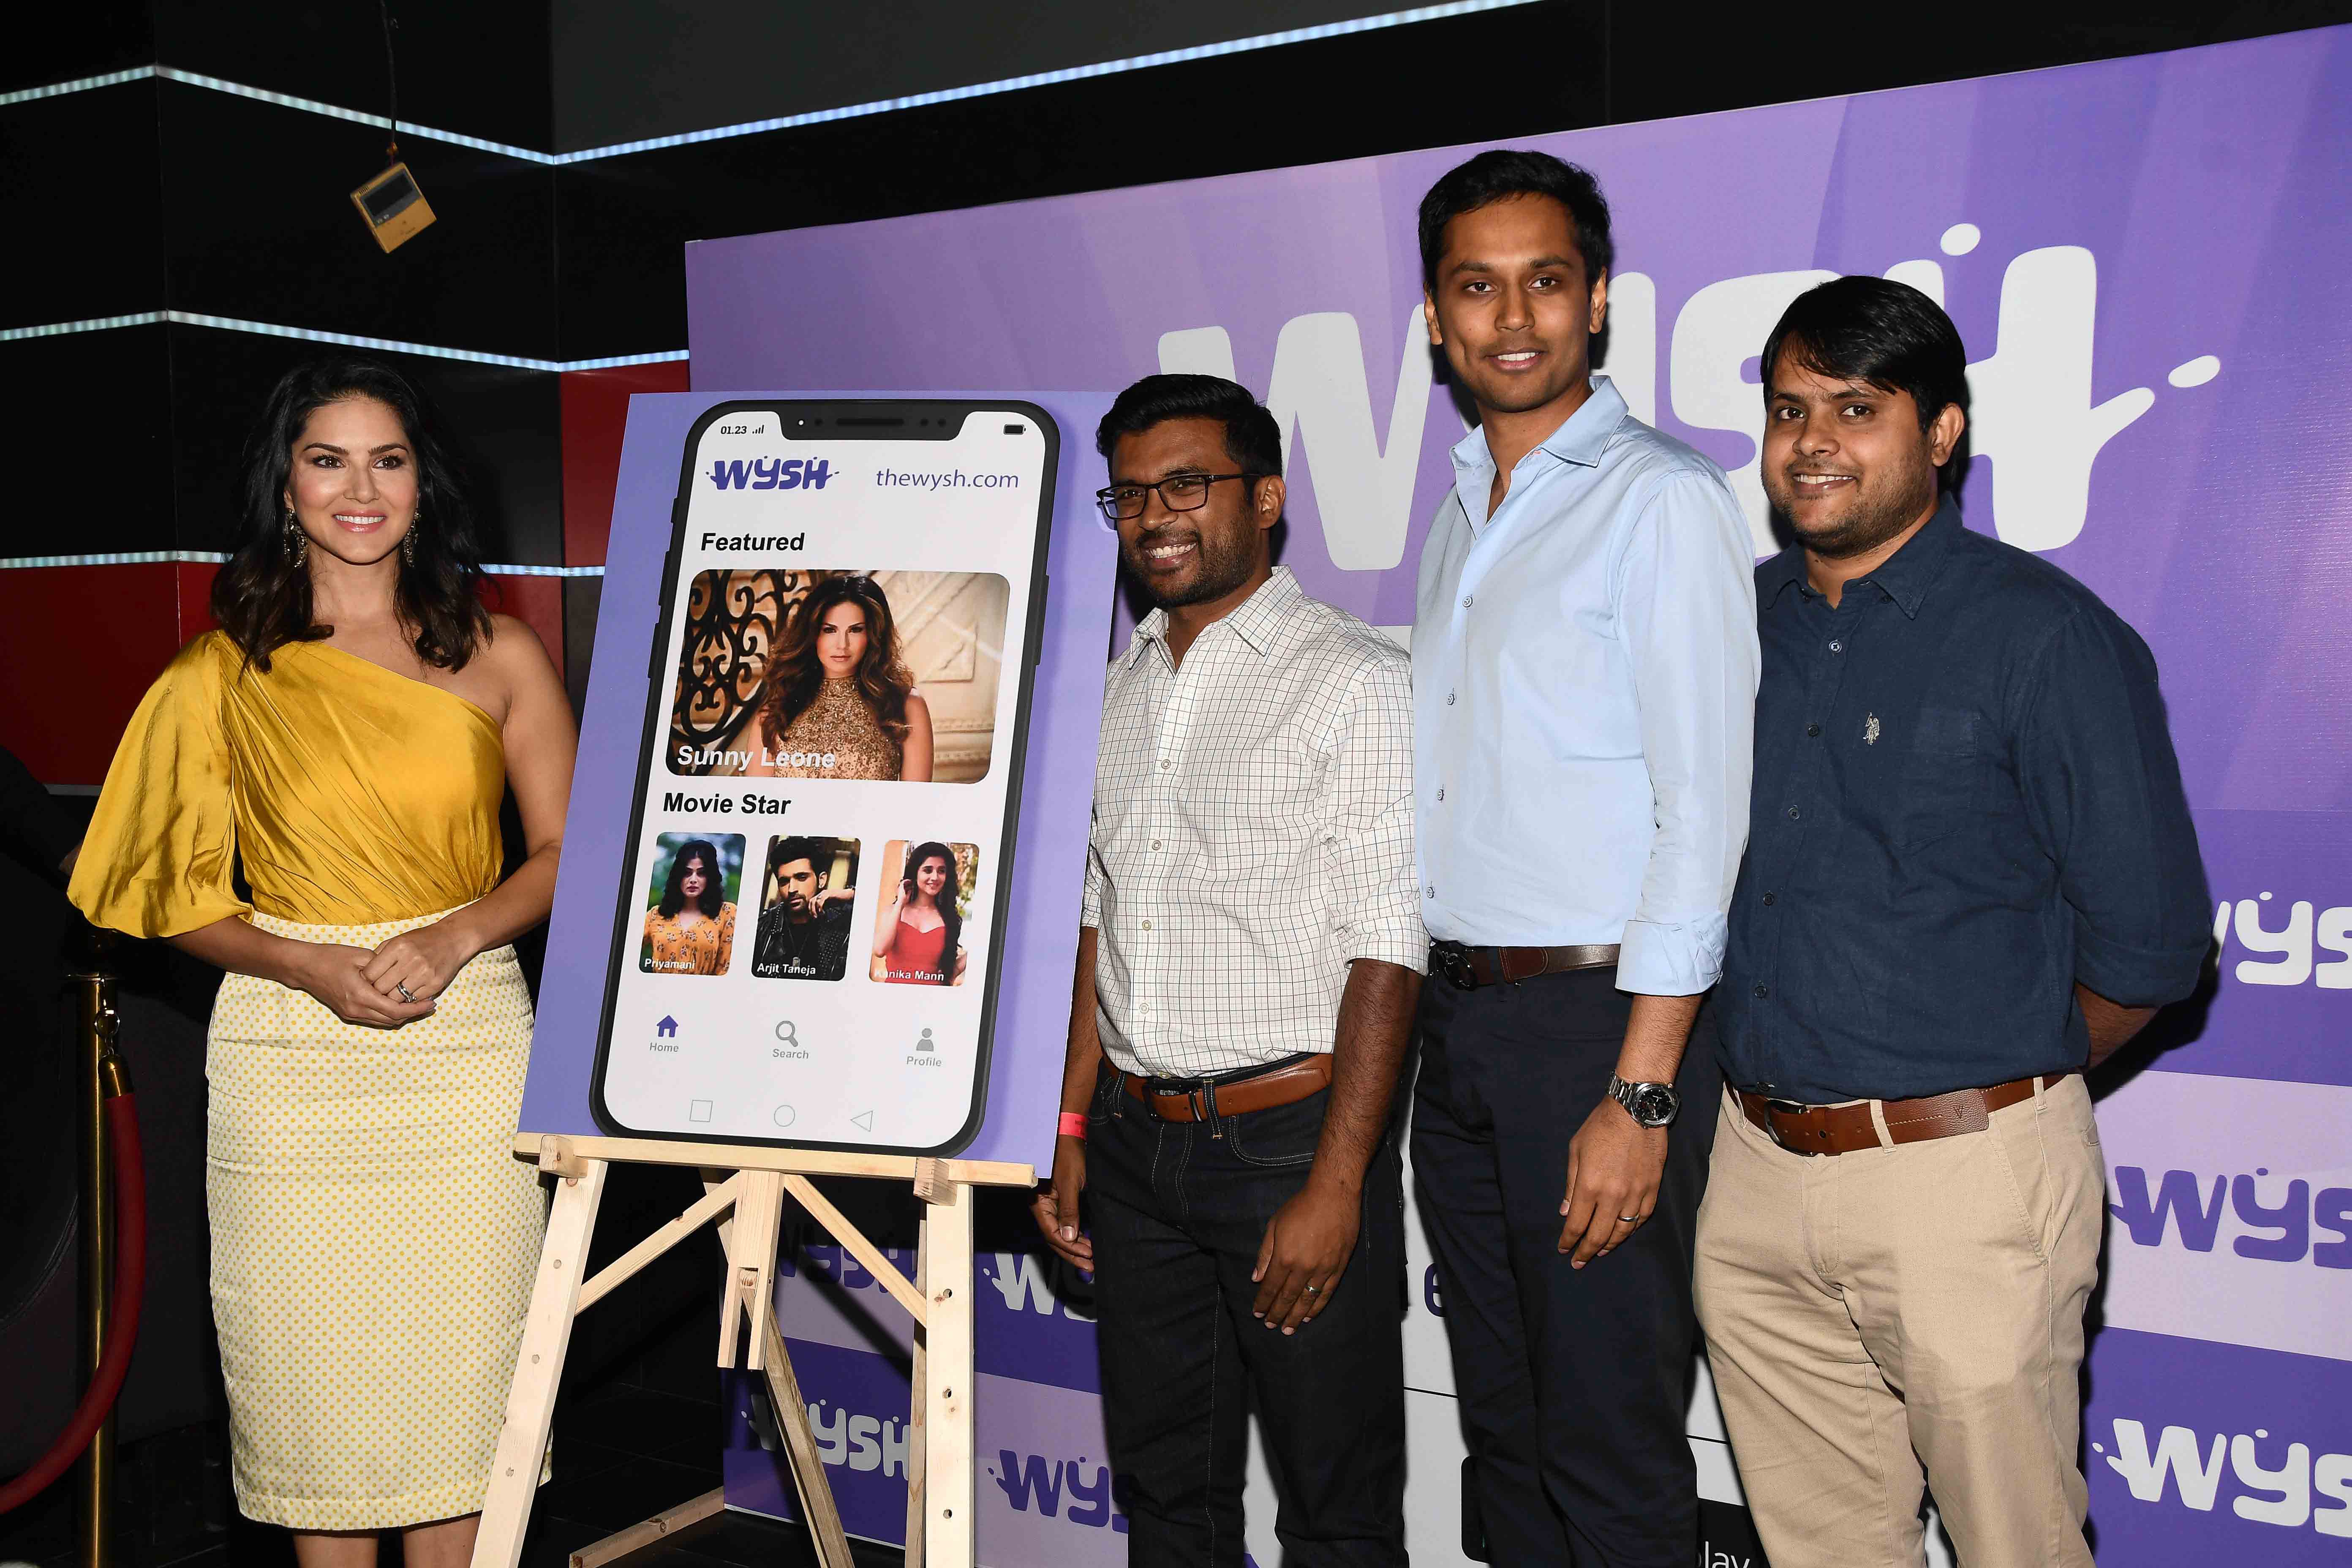 A Two Way Celebrity Engagement App inauguarated by Sunny Leone